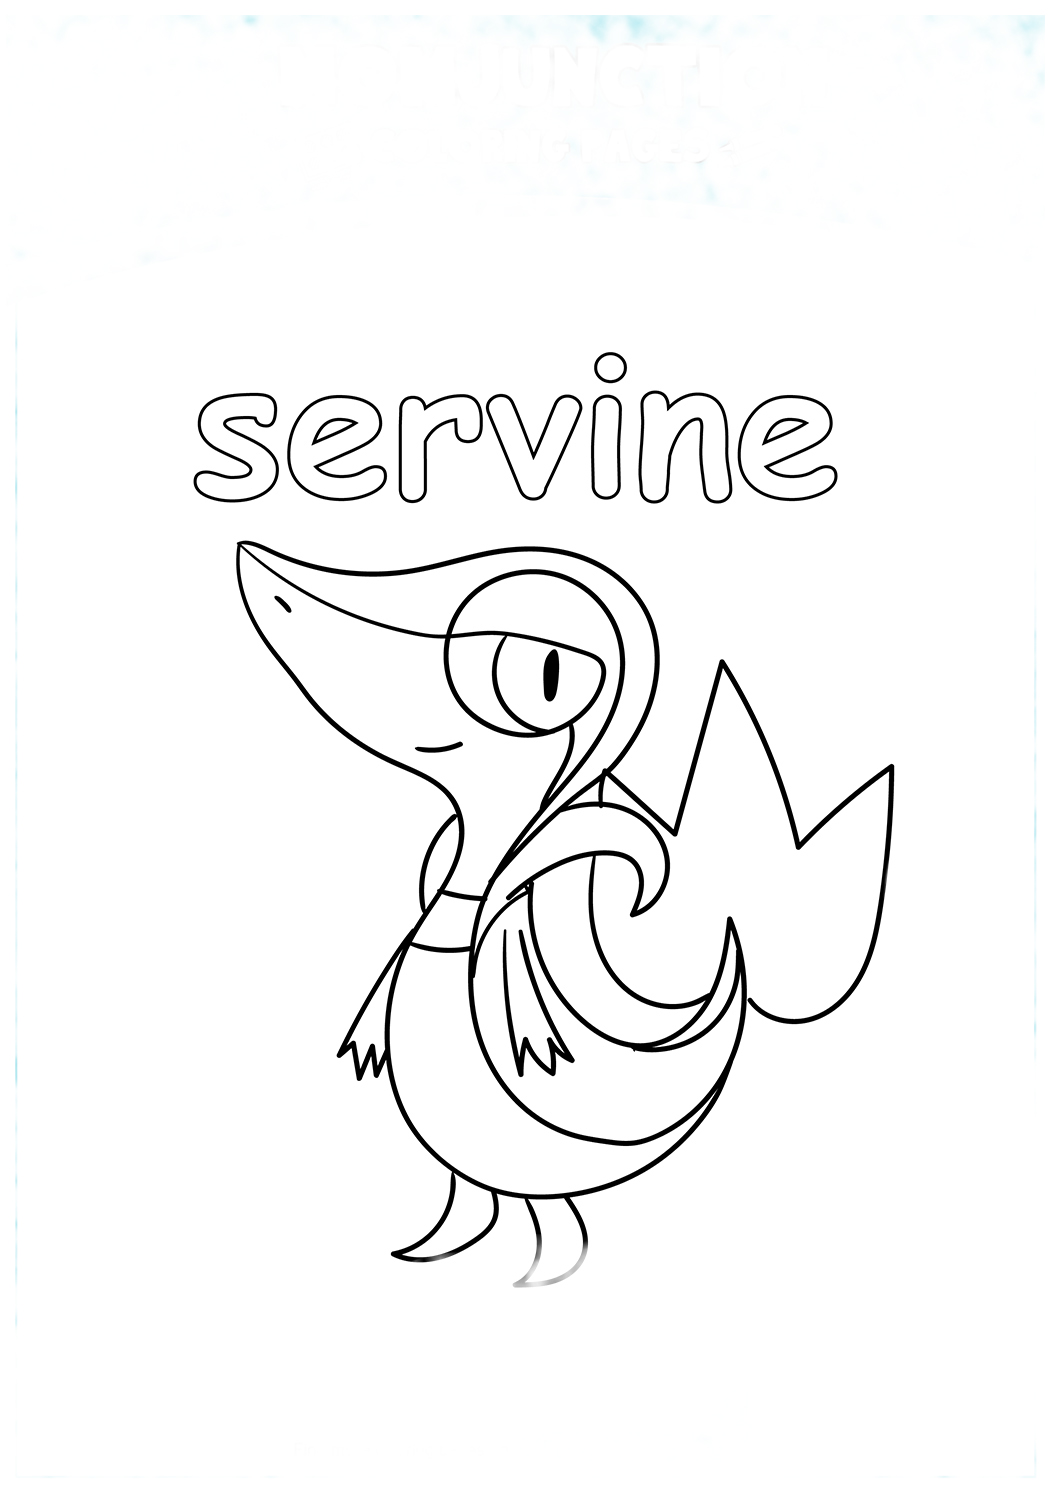 Servine Pokemon Coloring Page - Free Printable Coloring Pages for Kids